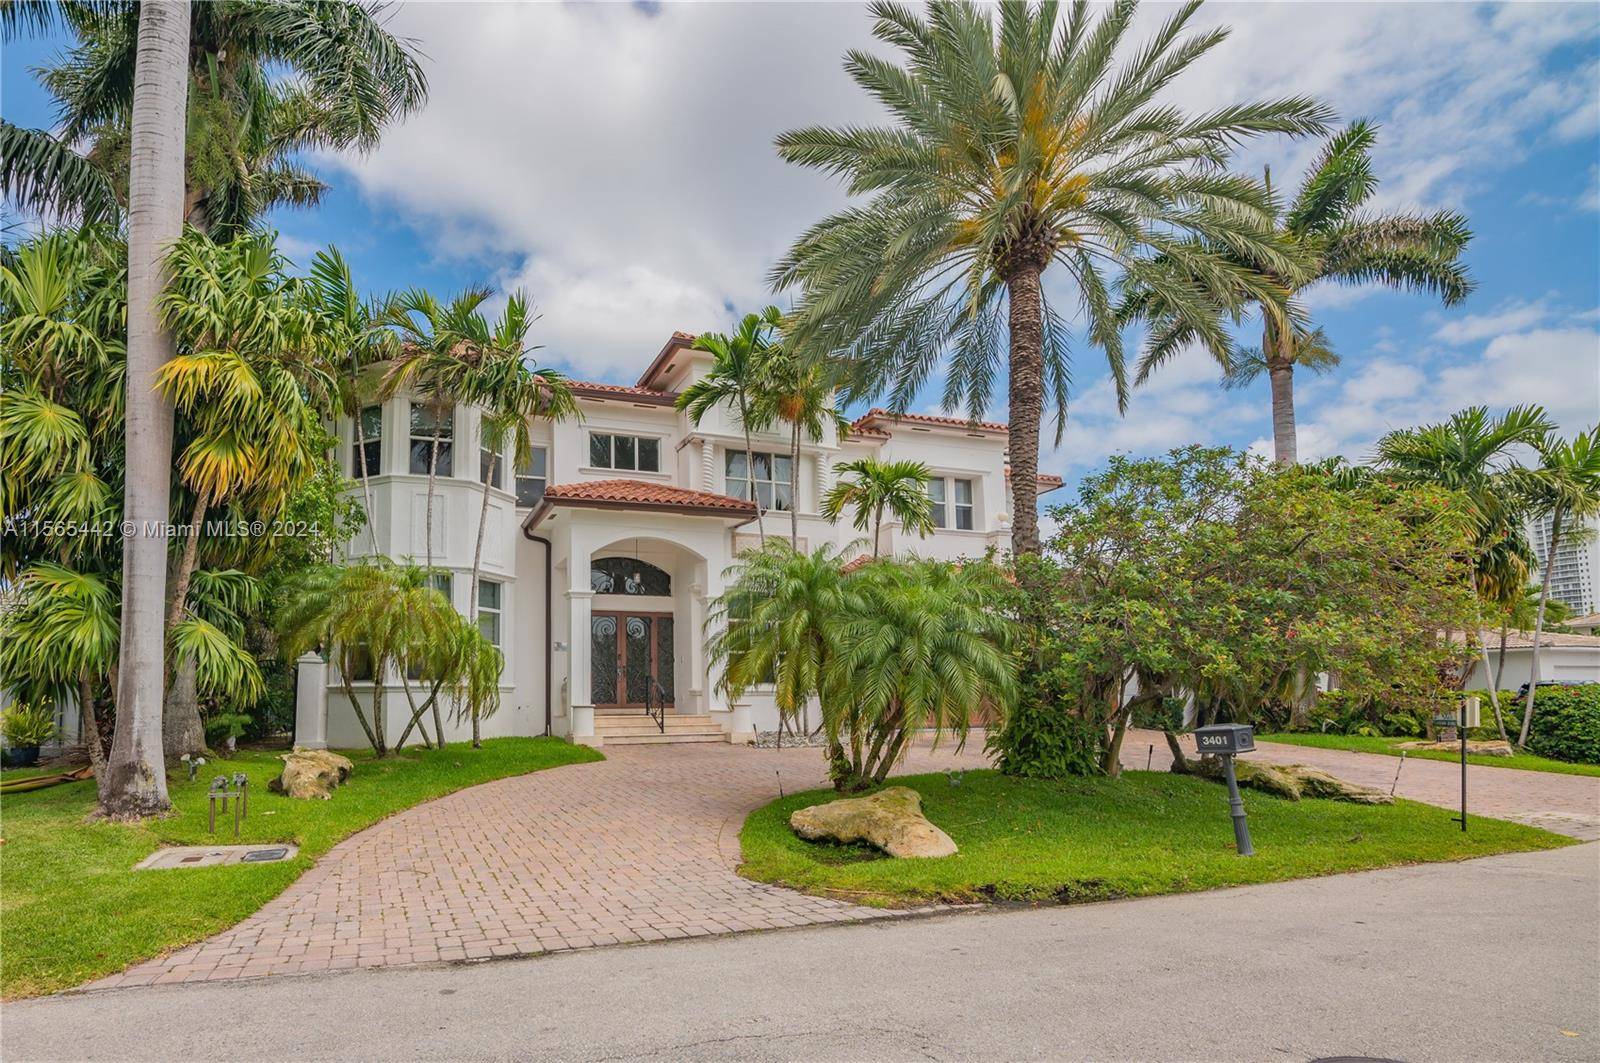 This luxurious 2 Story waterfront home was built in 2003 with many custom features.